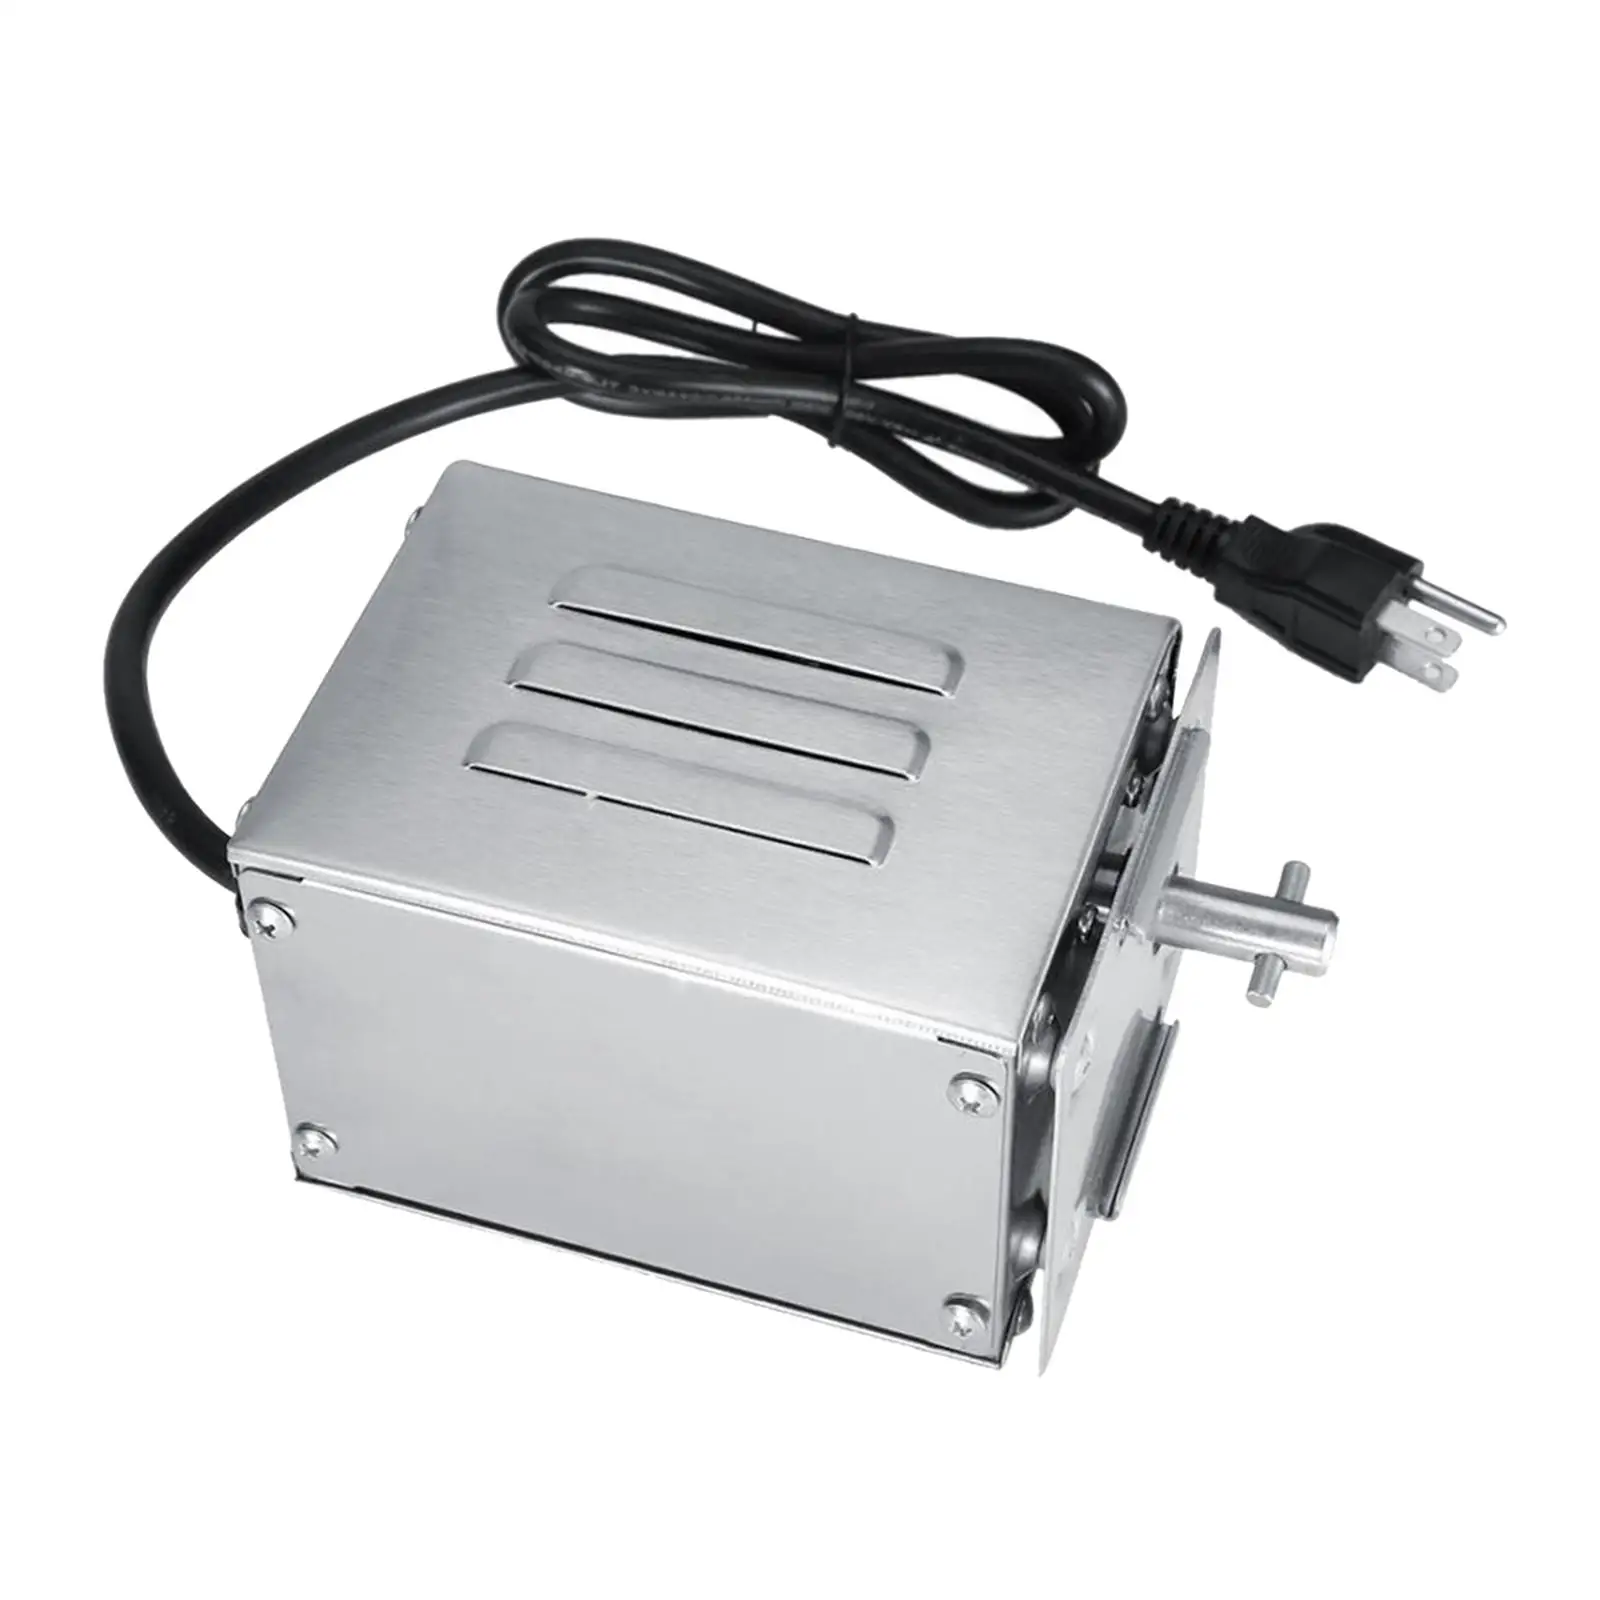 BBQ Grill Motor Rotating Motor Stainless Steel AC 110V 15W for Roasting Furnace Roasted Lambs Piglets Chicken Motor 3-5RPM